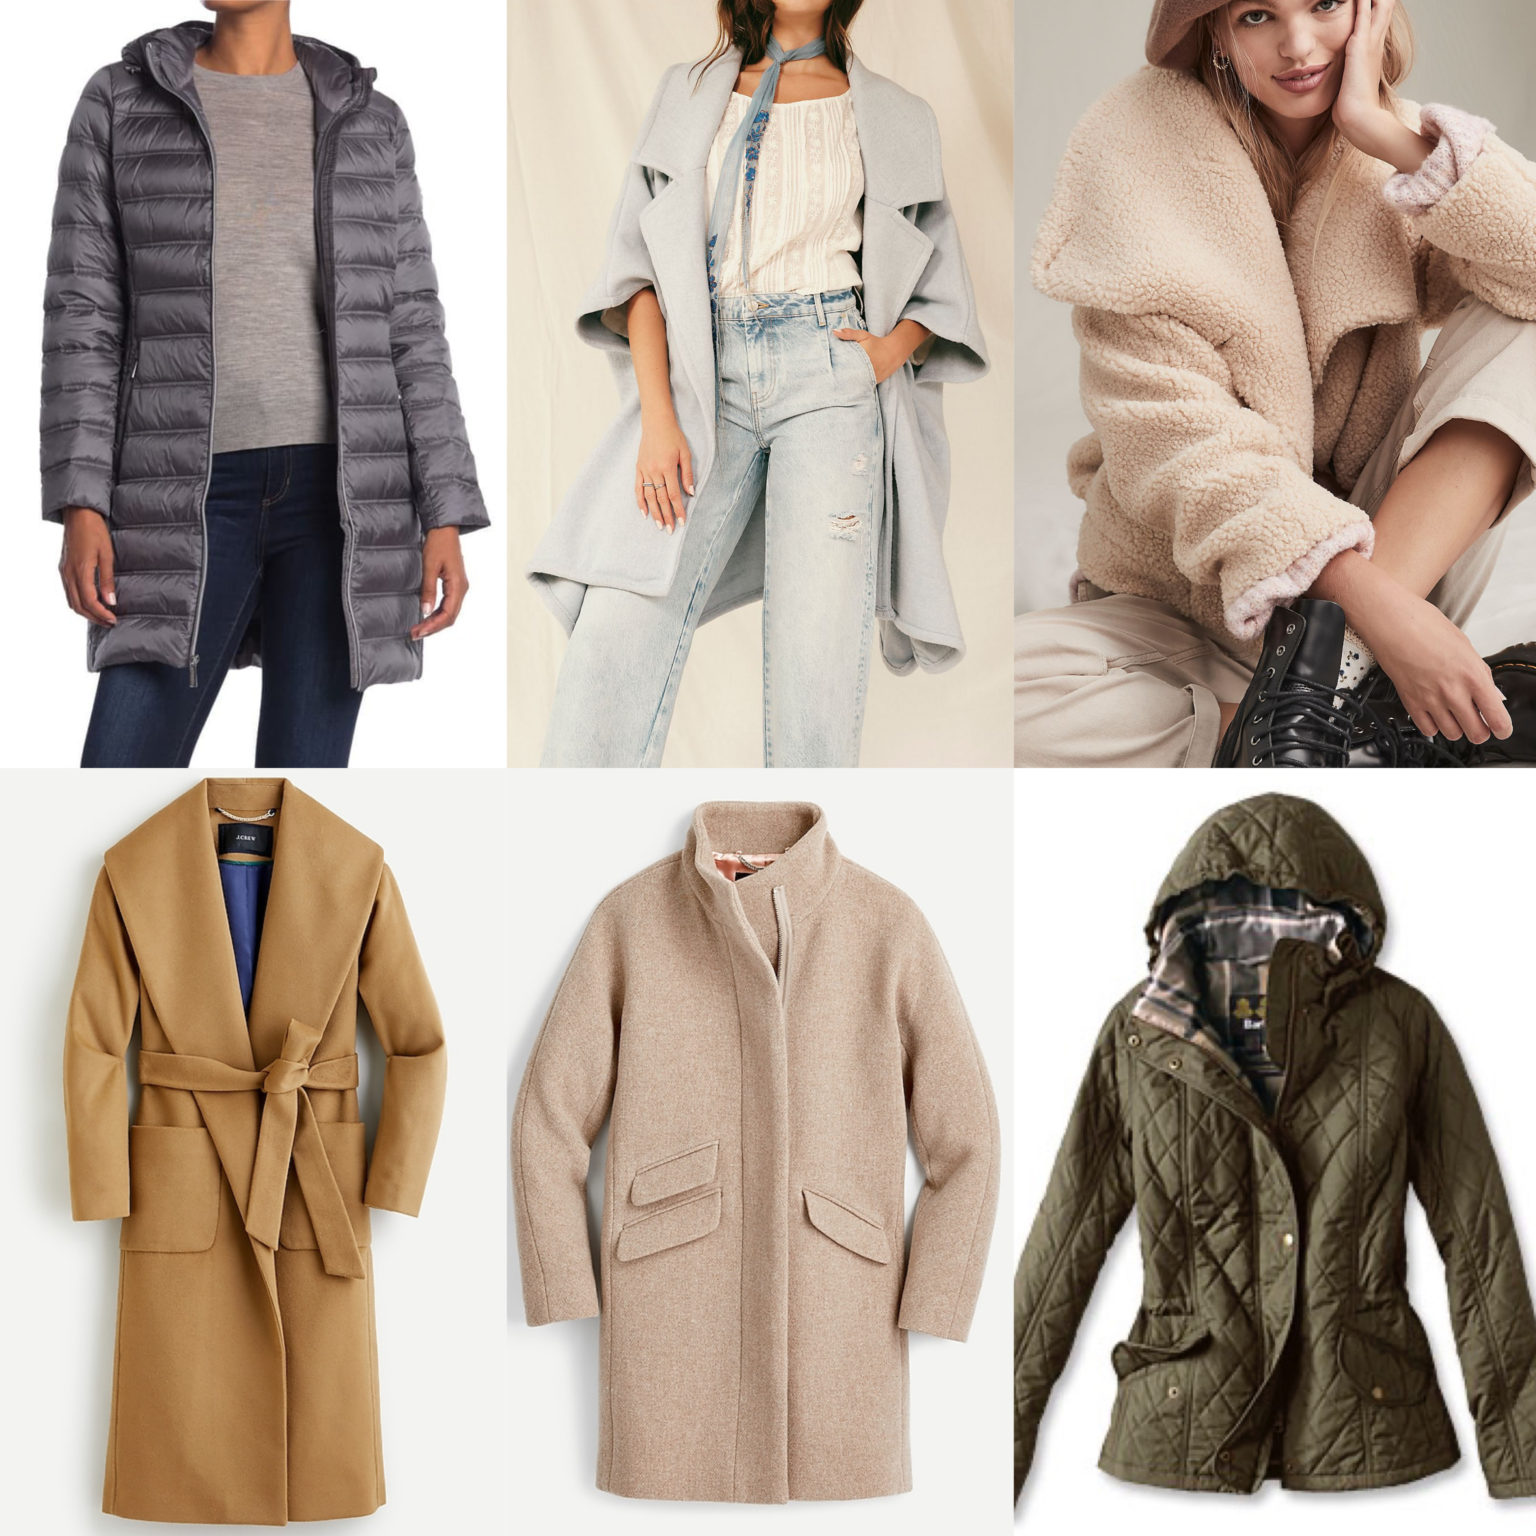 Outdoor Accessories for Winter Socializing - Effortless Style Nashville